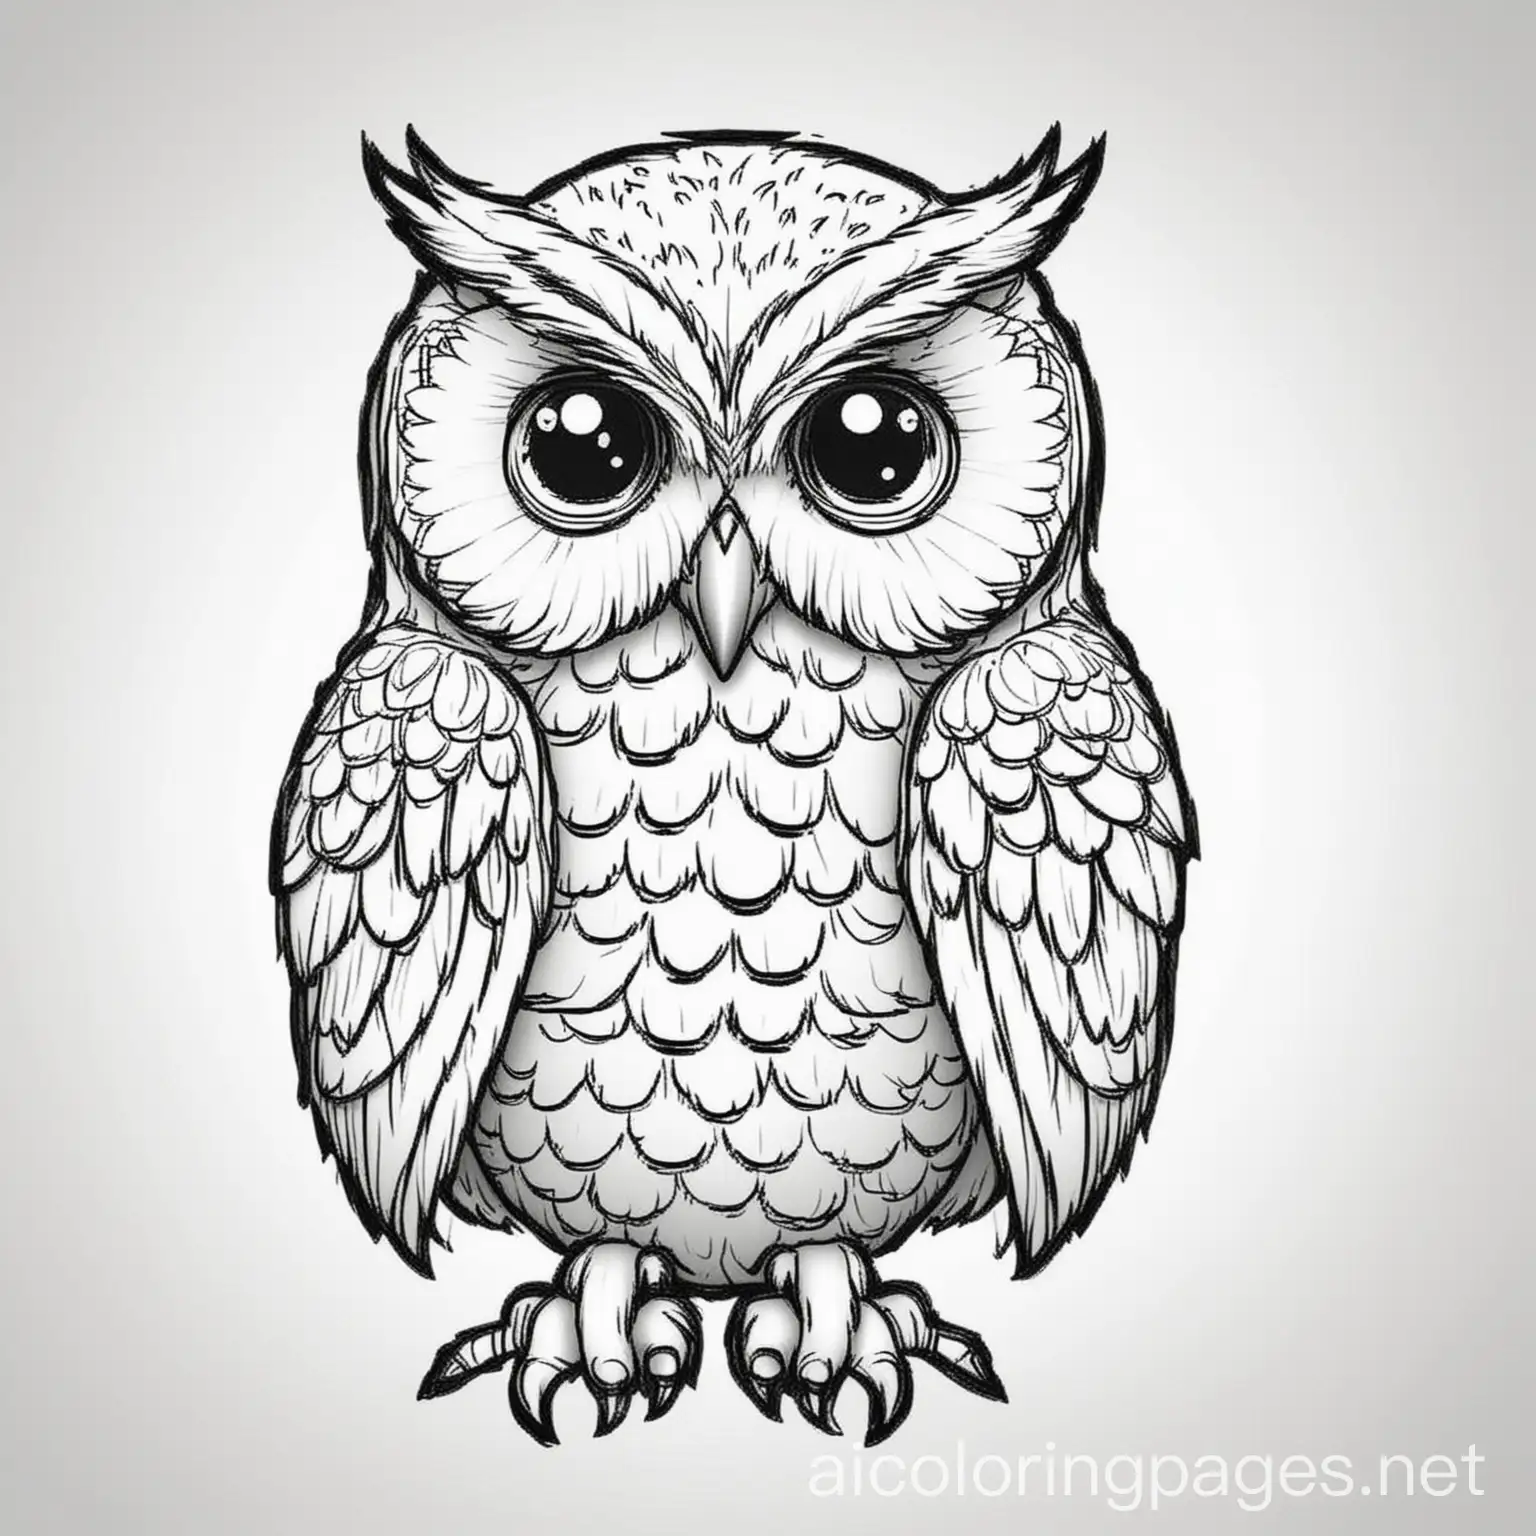 A cool looking owl, Coloring Page, black and white, line art, white background, Simplicity, Ample White Space. The background of the coloring page is plain white to make it easy for young children to color within the lines. The outlines of all the subjects are easy to distinguish, making it simple for kids to color without too much difficulty